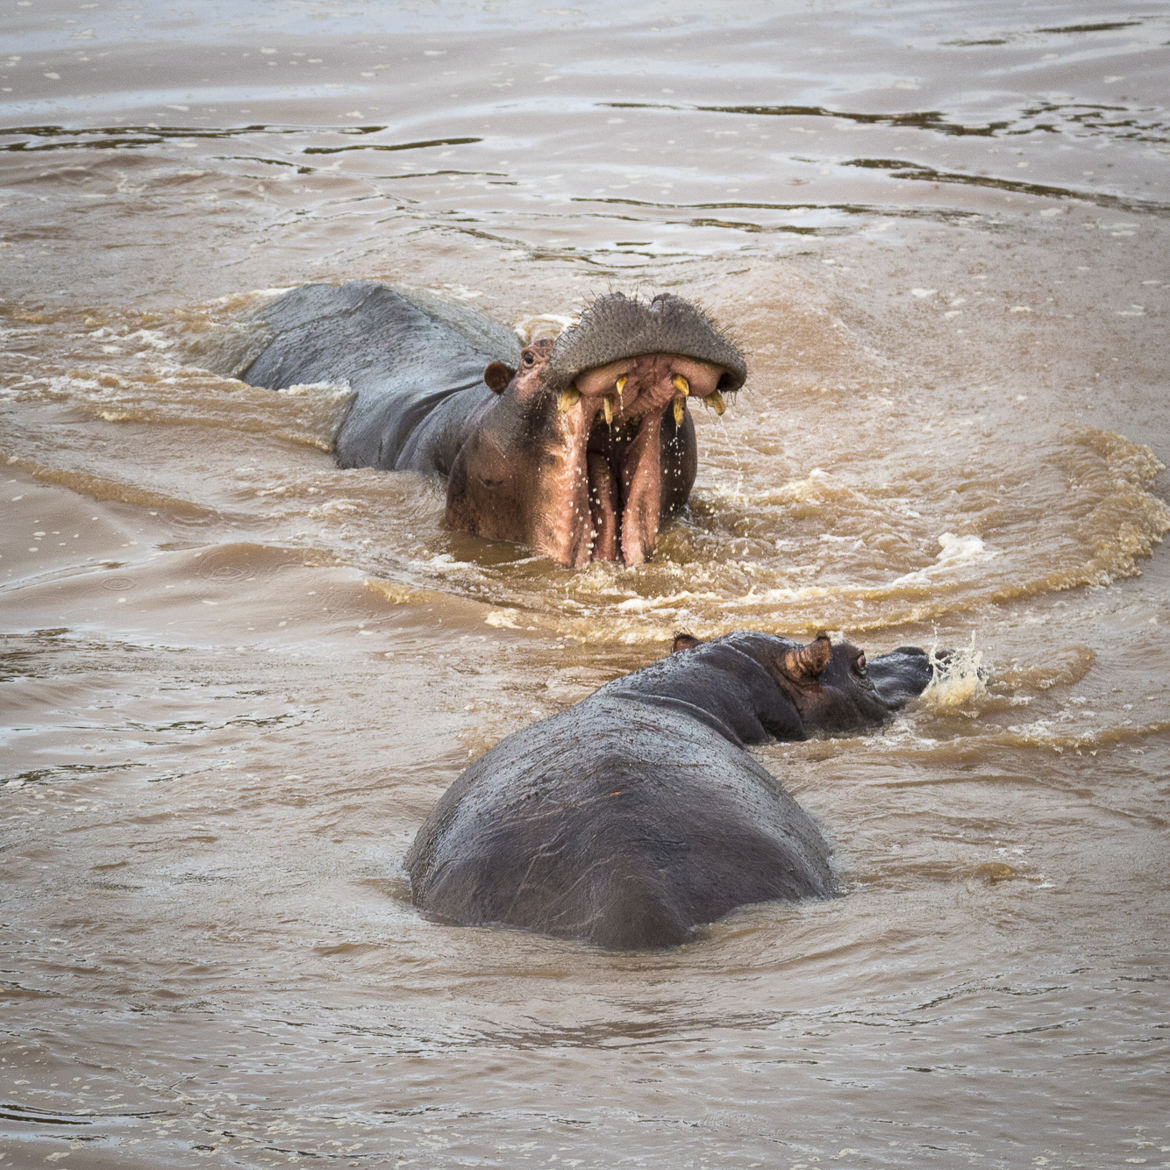 Discussion entre hippos